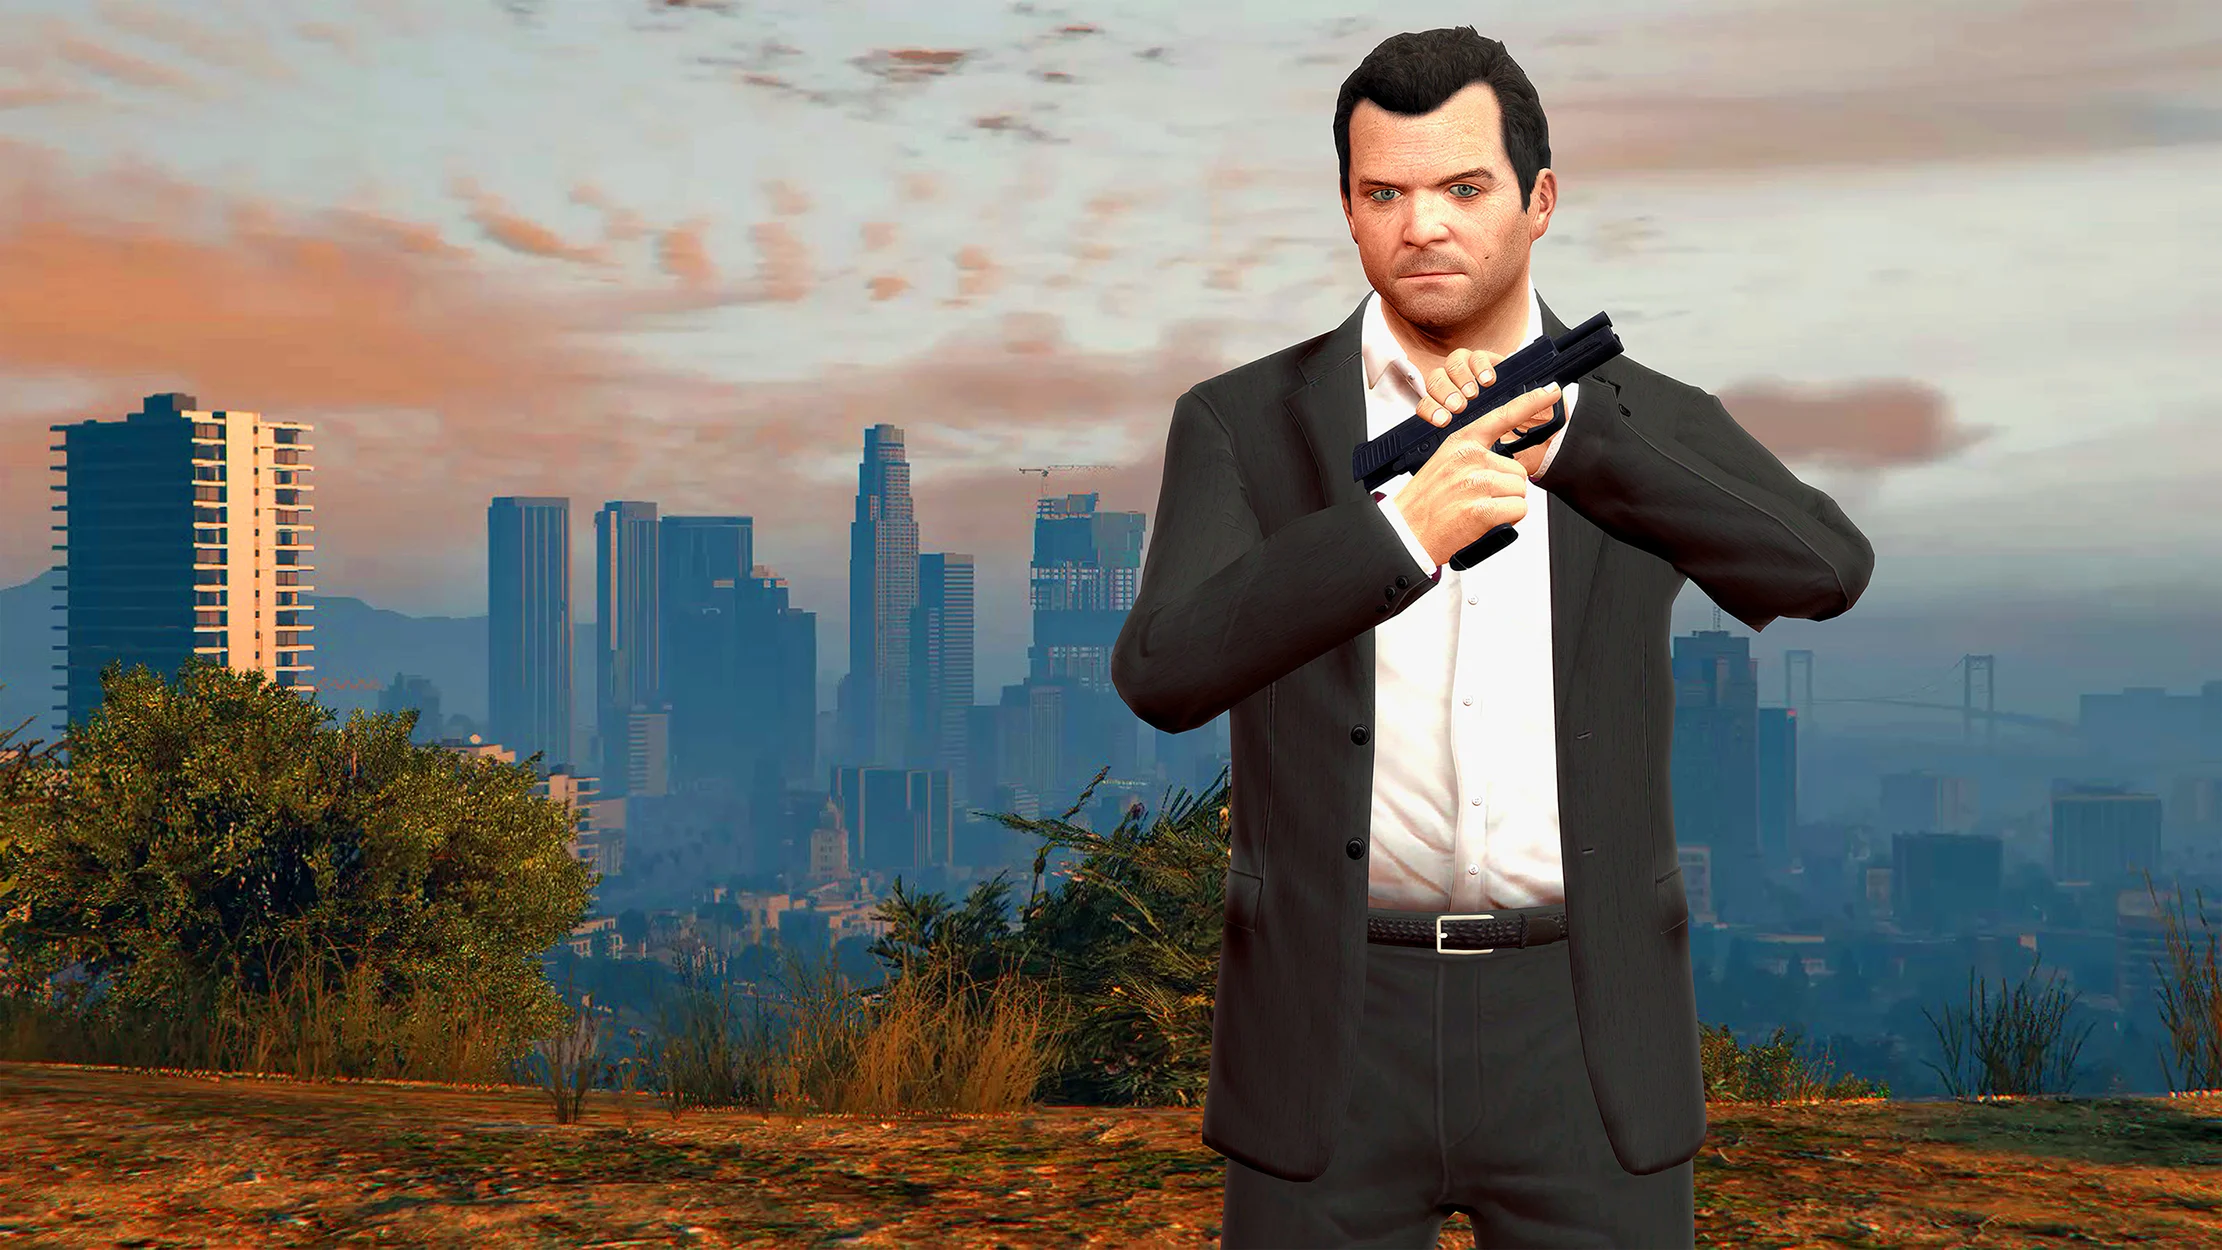 Michael from GTA V may appear in a cameo in the next part of the series